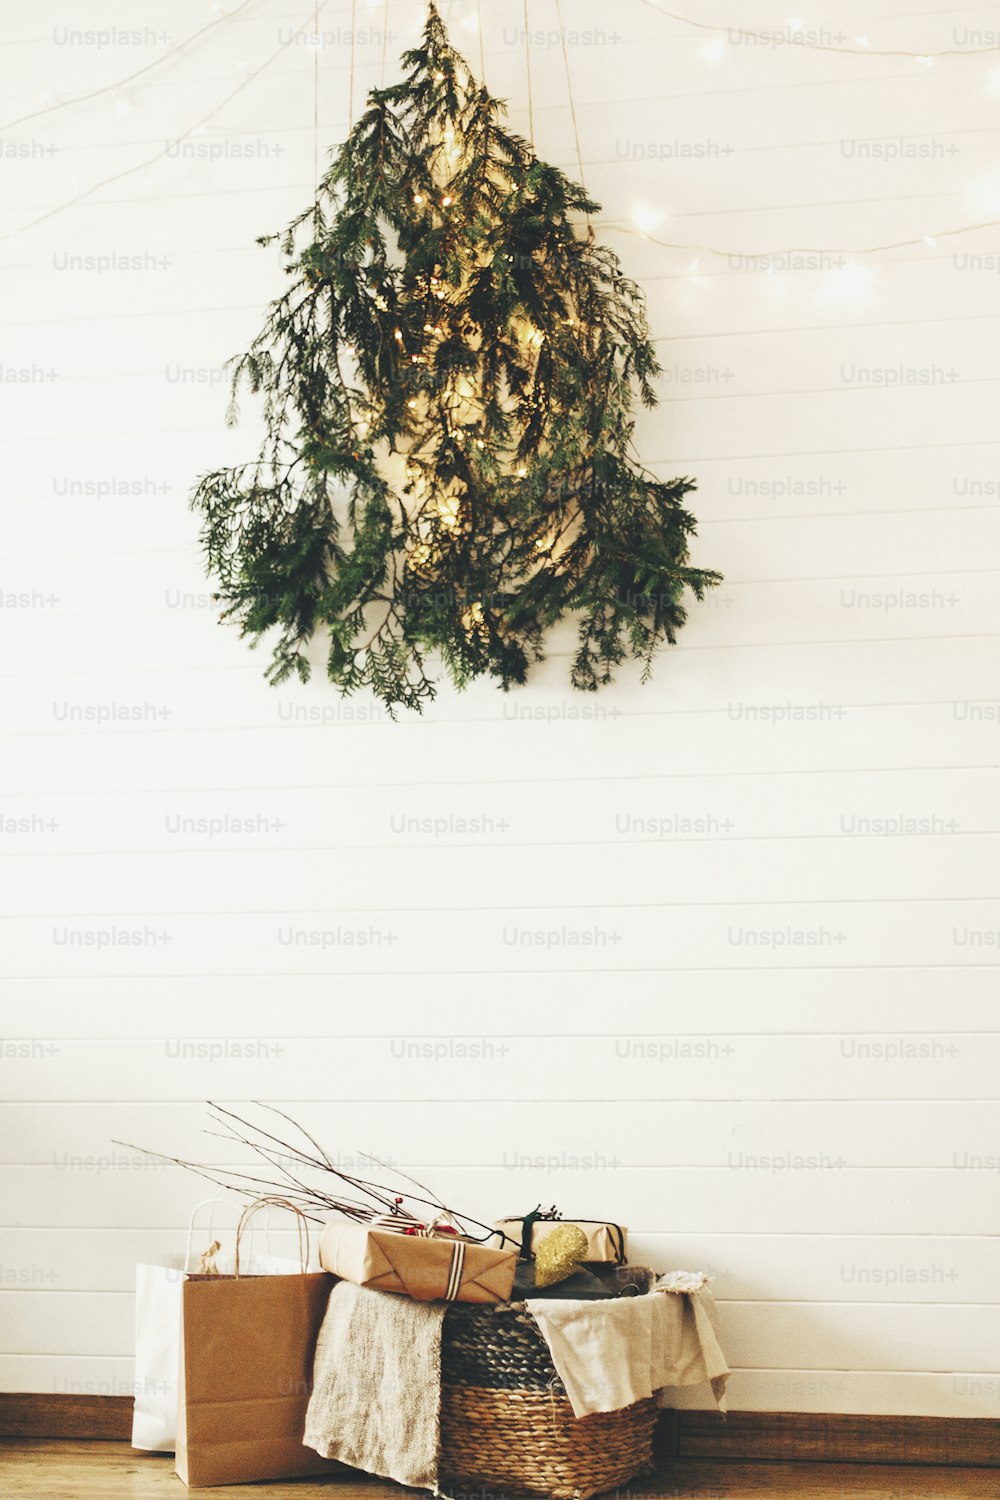 Modern christmas eco tree of pine branches hanging on wall with festive lights and presents in rustic basket. Stylish christmas gift boxes on wooden floor under creative christmas tree.